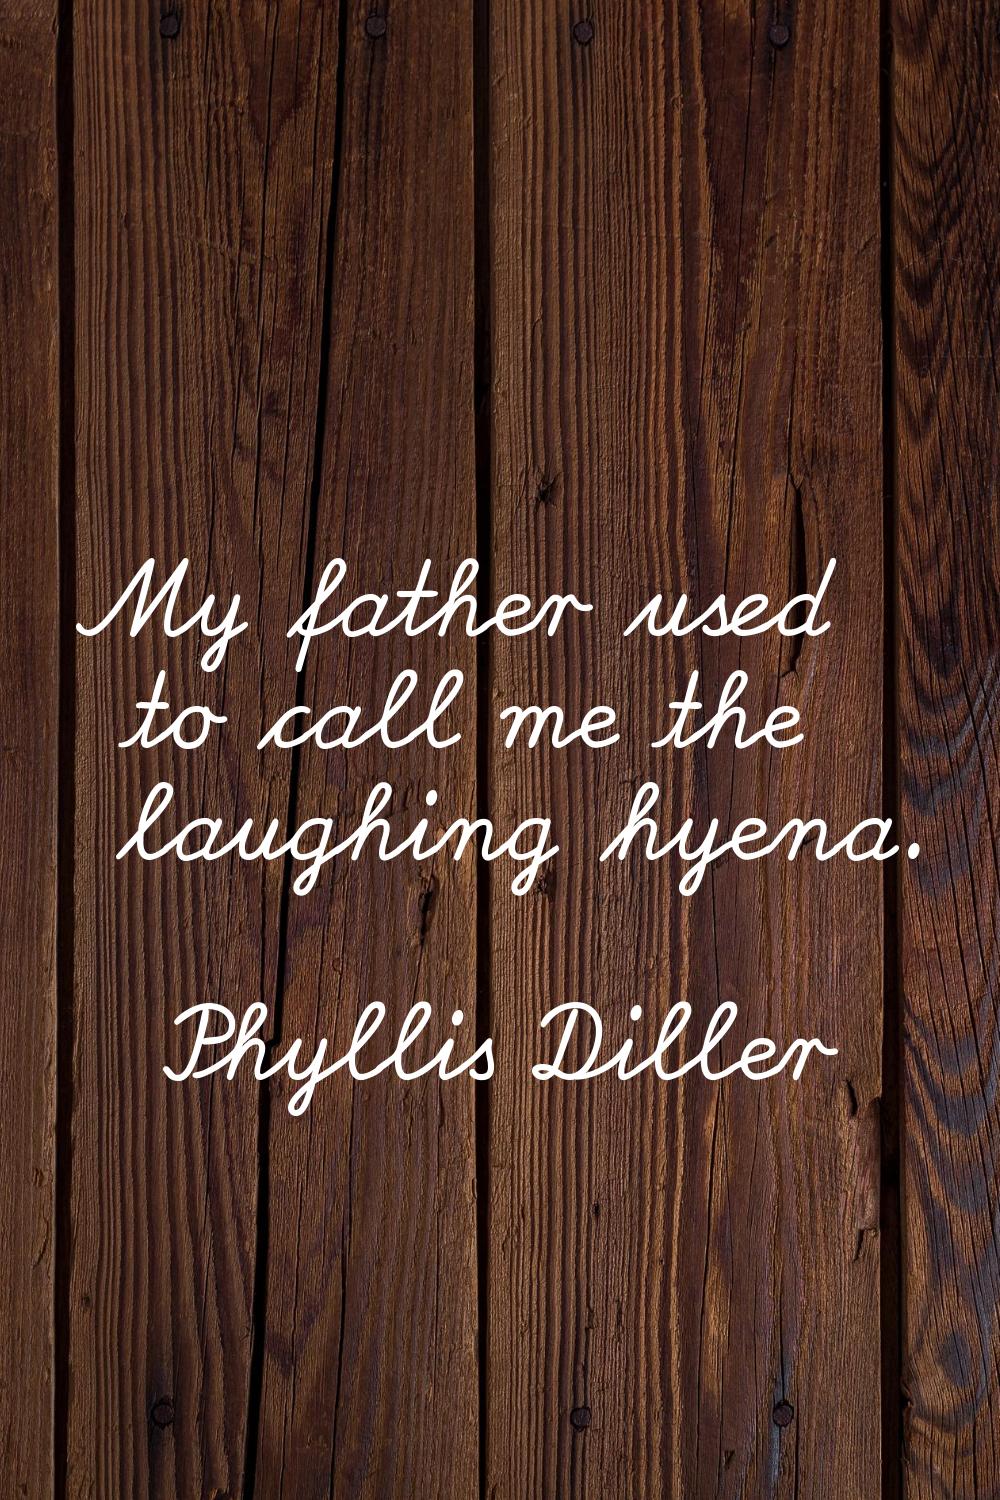 My father used to call me the laughing hyena.